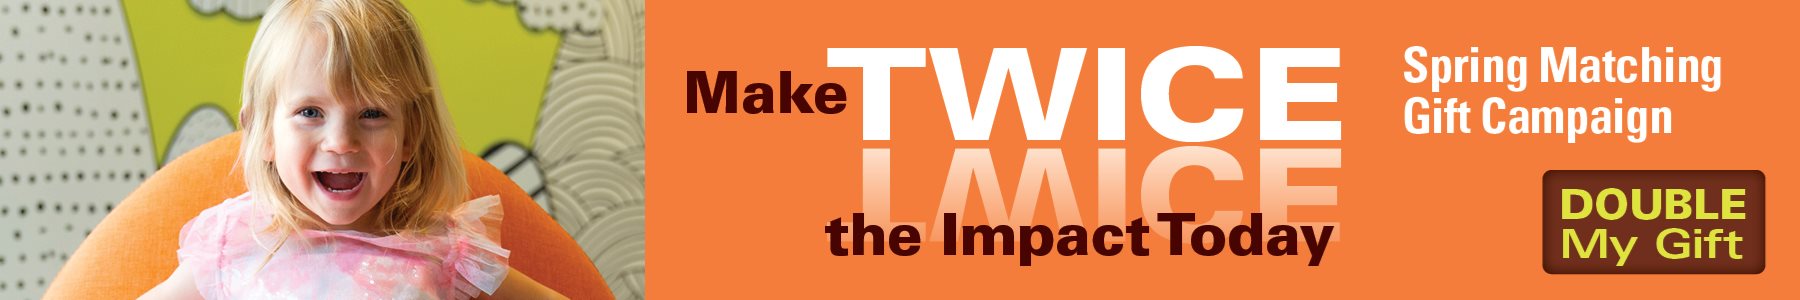 Make Twice the Impact with a Donation Today